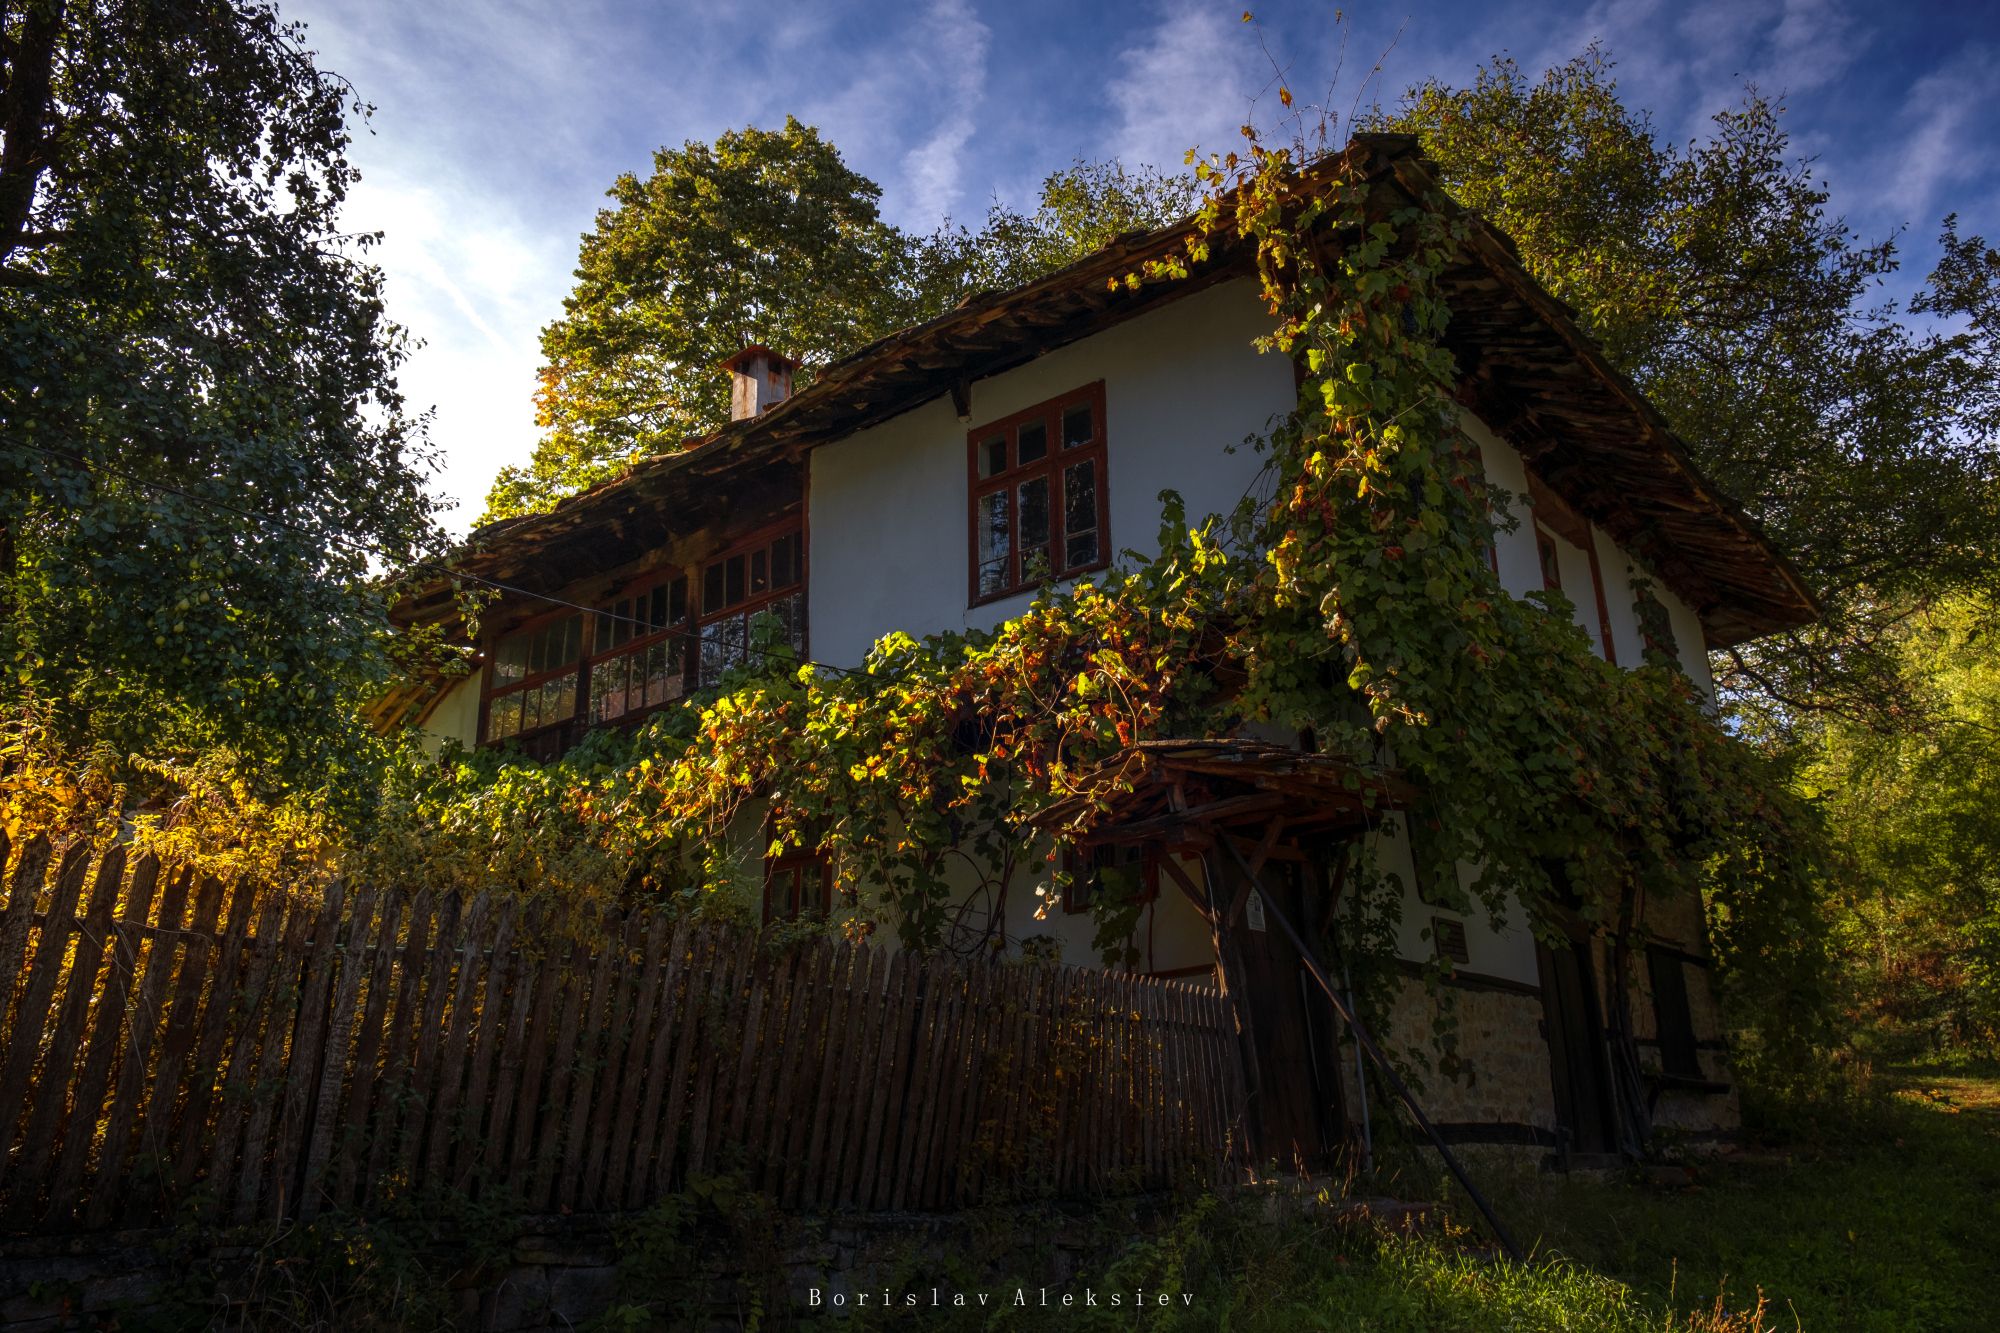 bulgaria,travel,green,white,flowers,summer,exterior,building,house, Борислав Алексиев